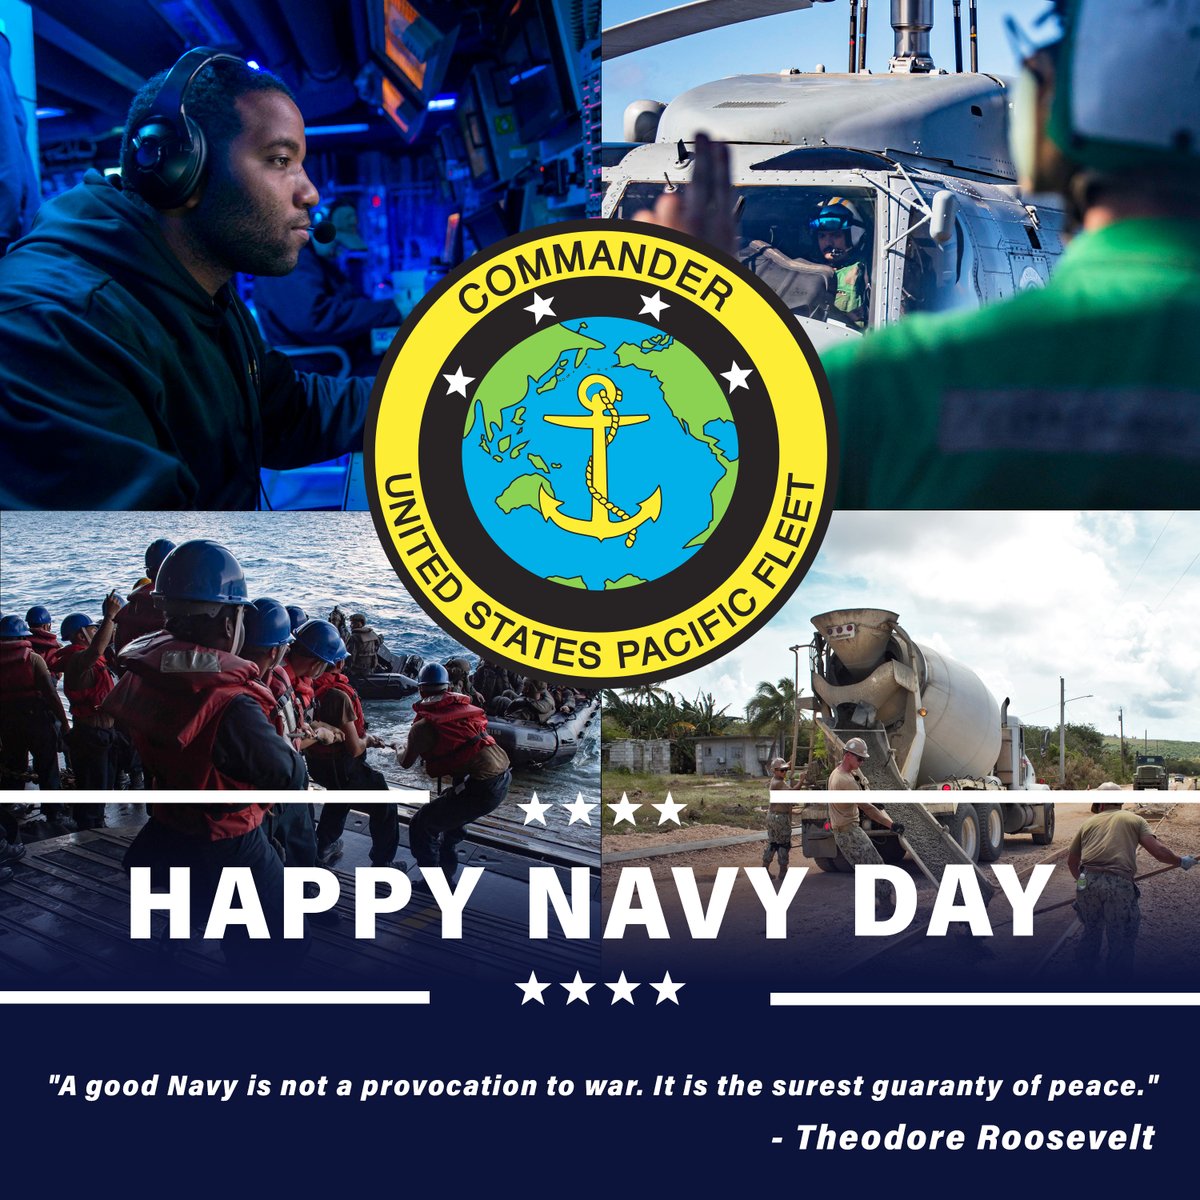 Happy Navy Day to all our sailors at sea and ashore across the fleet! #NavyDay @USNavy